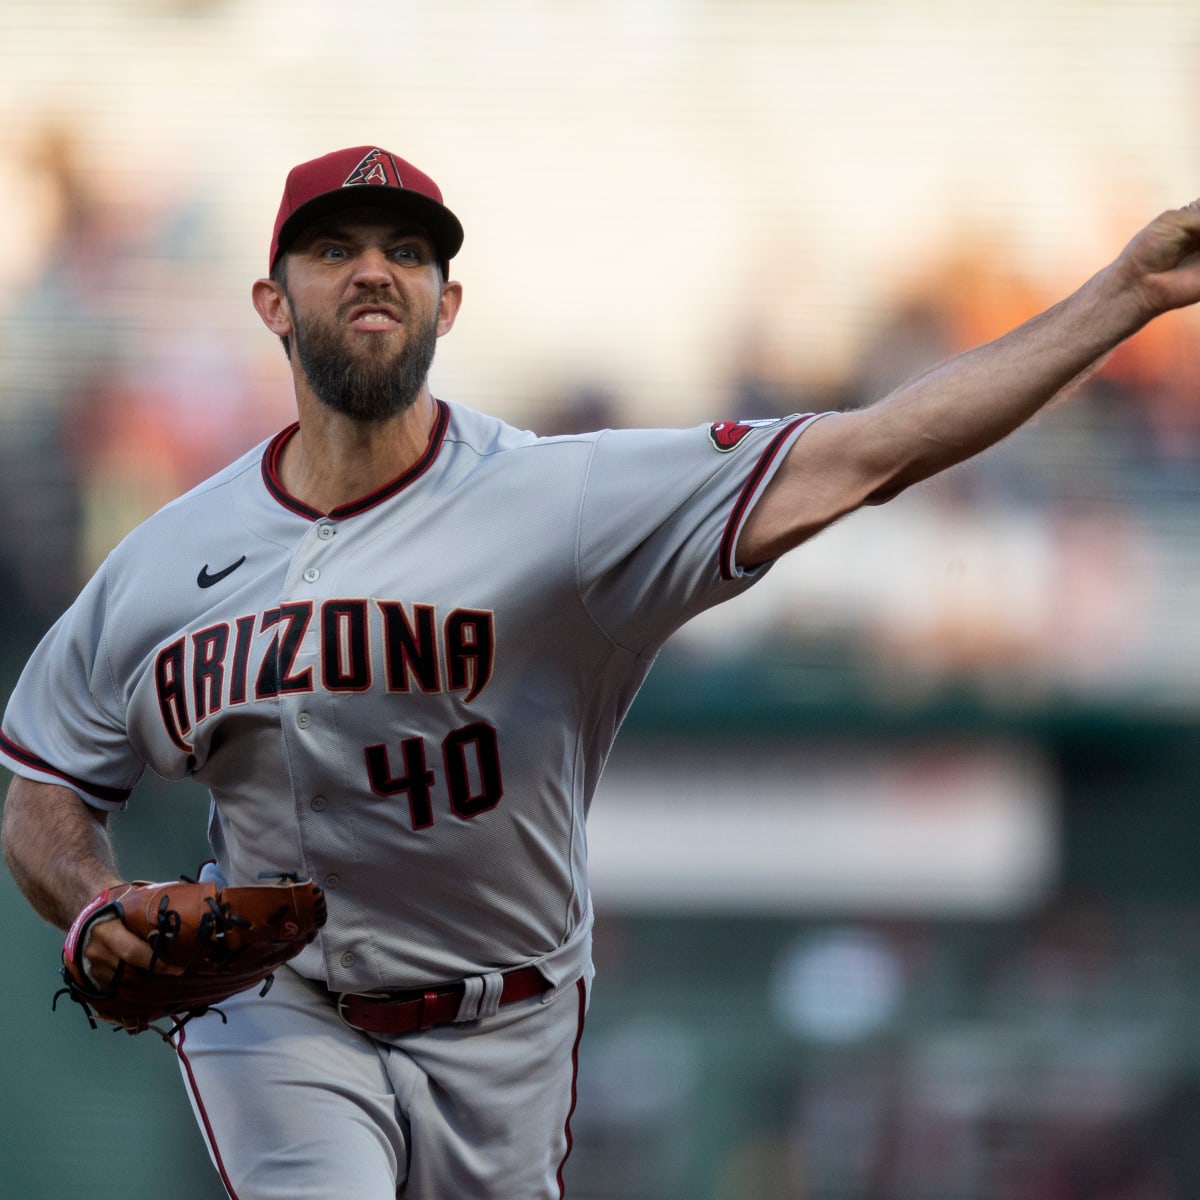 The weird milestone Madison Bumgarner reached with Arizona but not